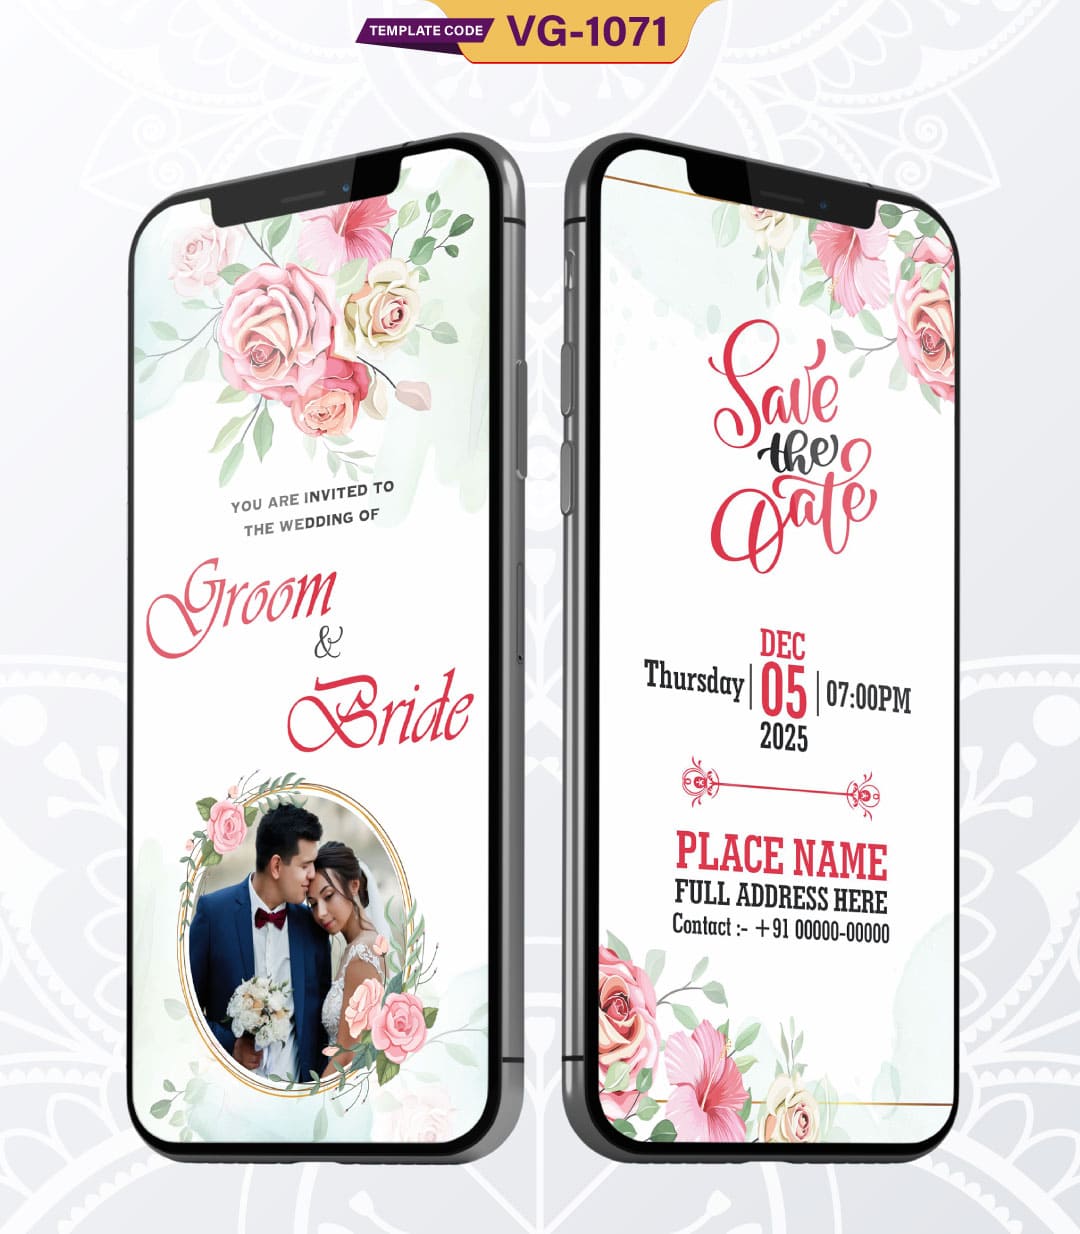 Floral Save The Date Wedding Invite